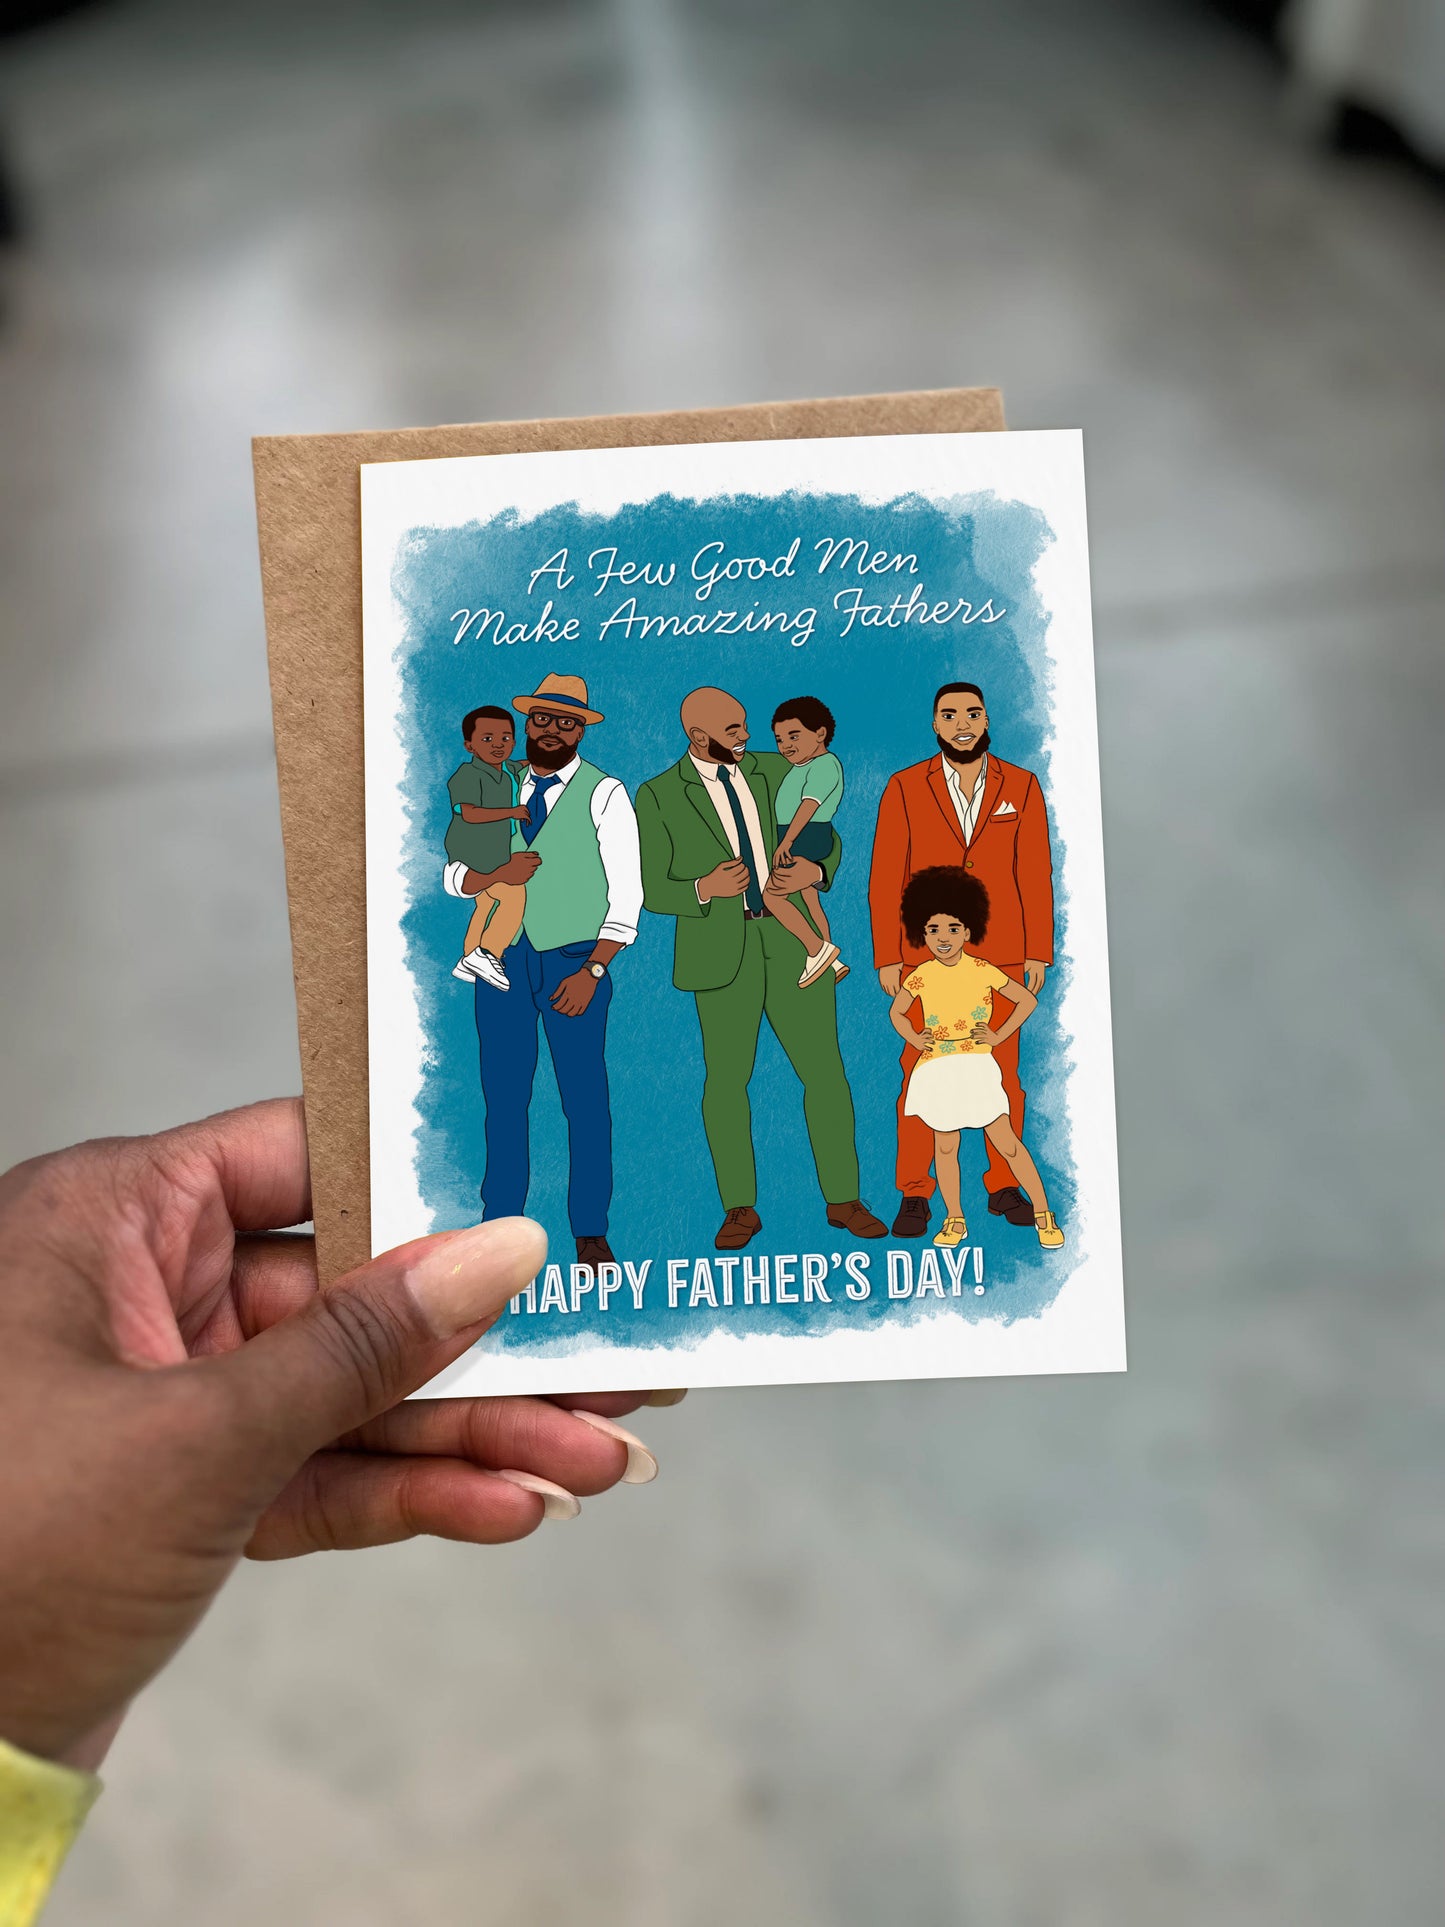 Dads Club 4.25x5.5” A2 Father's Day Dad greeting card. Black African American Fathers Card. Colorful Eco-friendly Card for Dad from Goods Made By Digitrillnana, Ashley Fletcher. Black Woman Owned. Gifts celebrating Black, African-American culture. Perfect Dad to Dad Father's day gift!